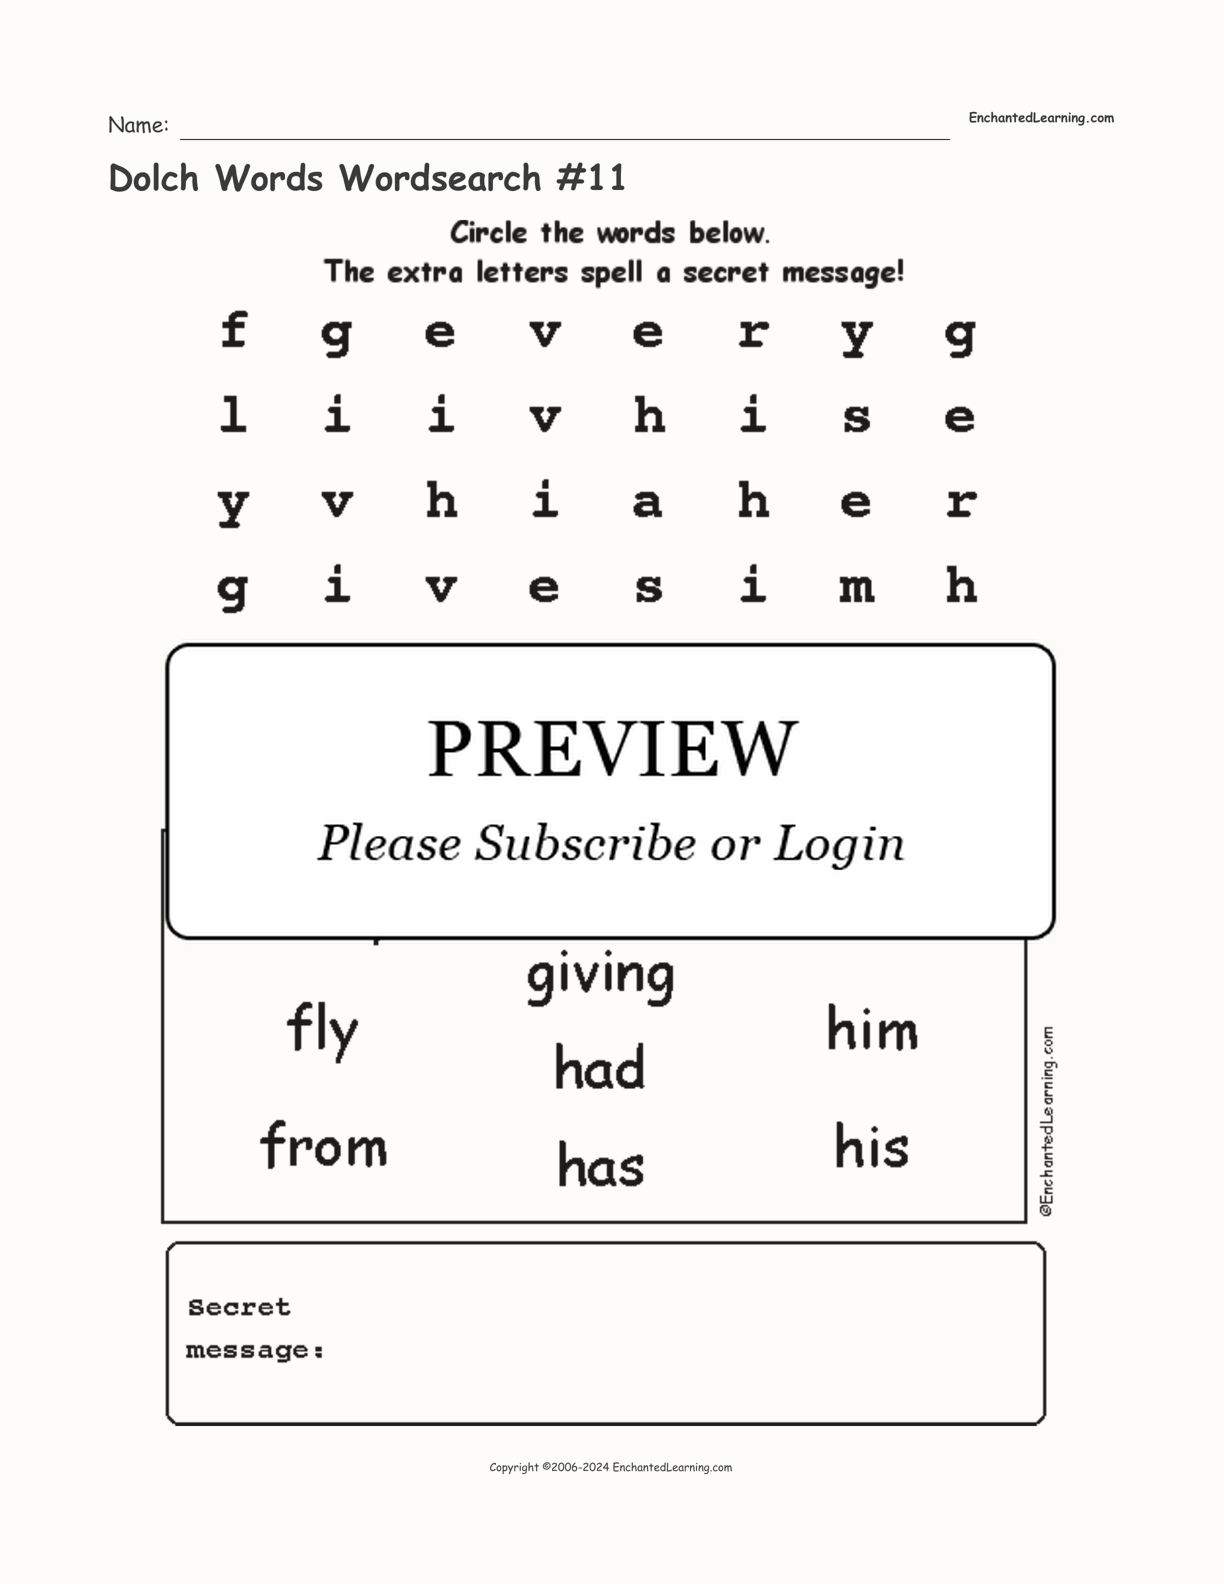 Dolch Words Wordsearch #11 interactive worksheet page 1